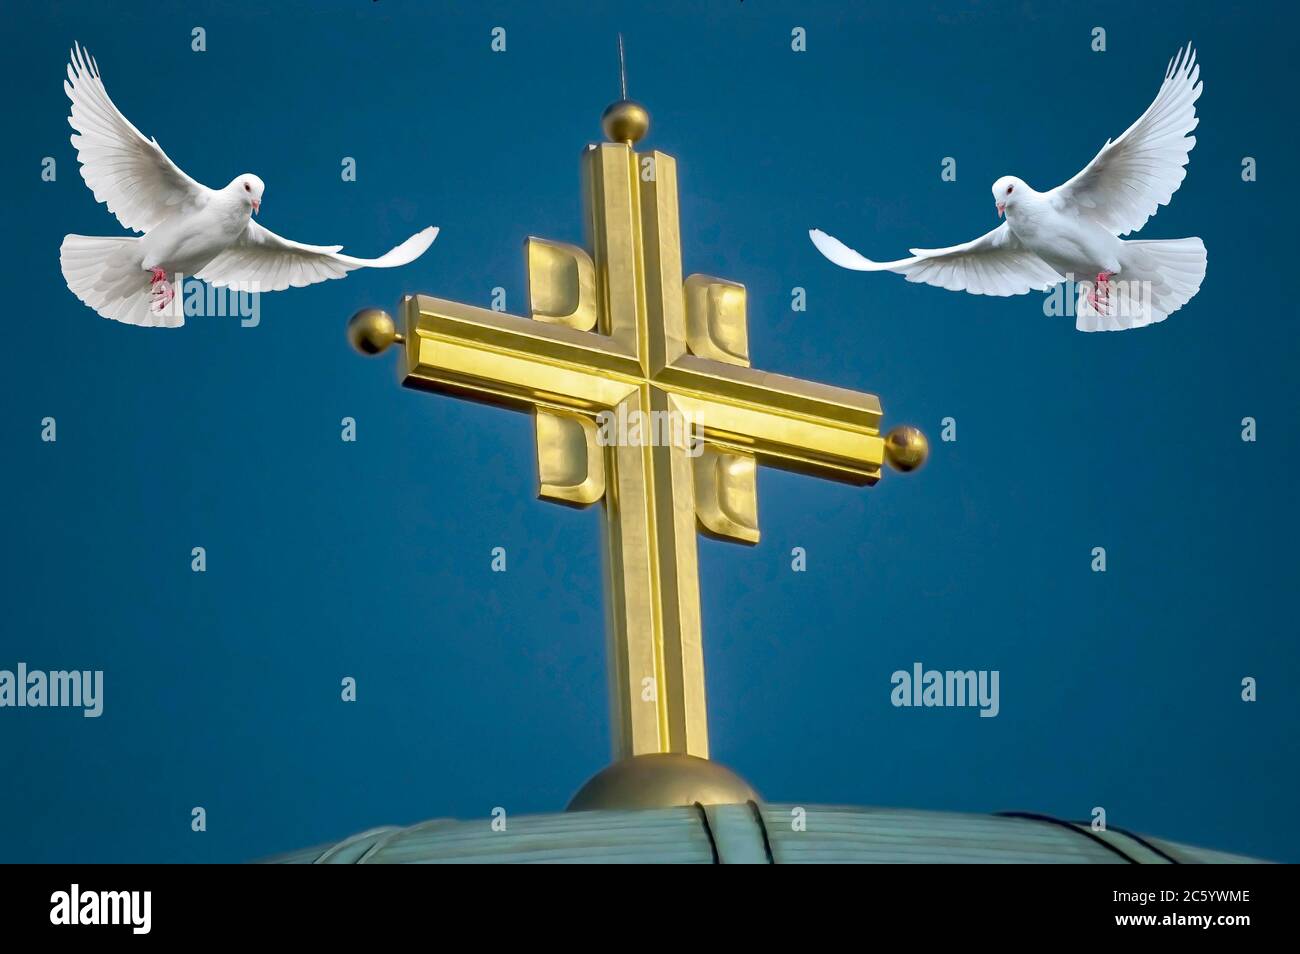 two white doves in flight around the golden cross on the dome of the temple Stock Photo